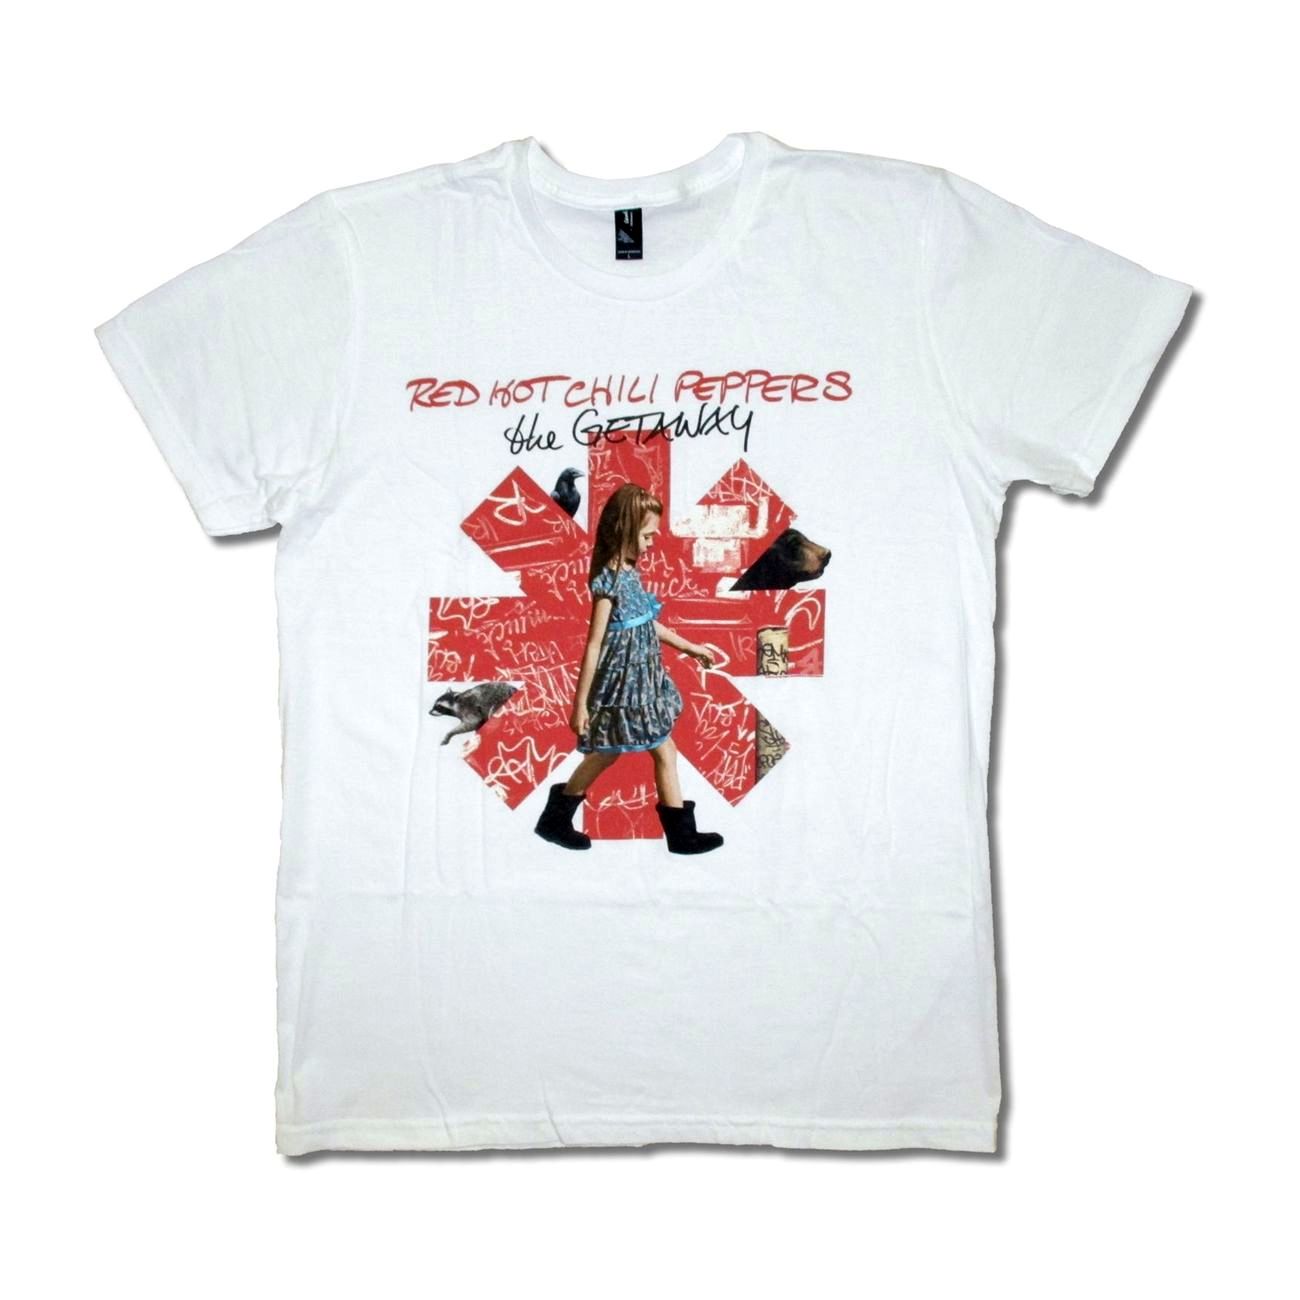 RED HOT chili peppers バンド tシャツ